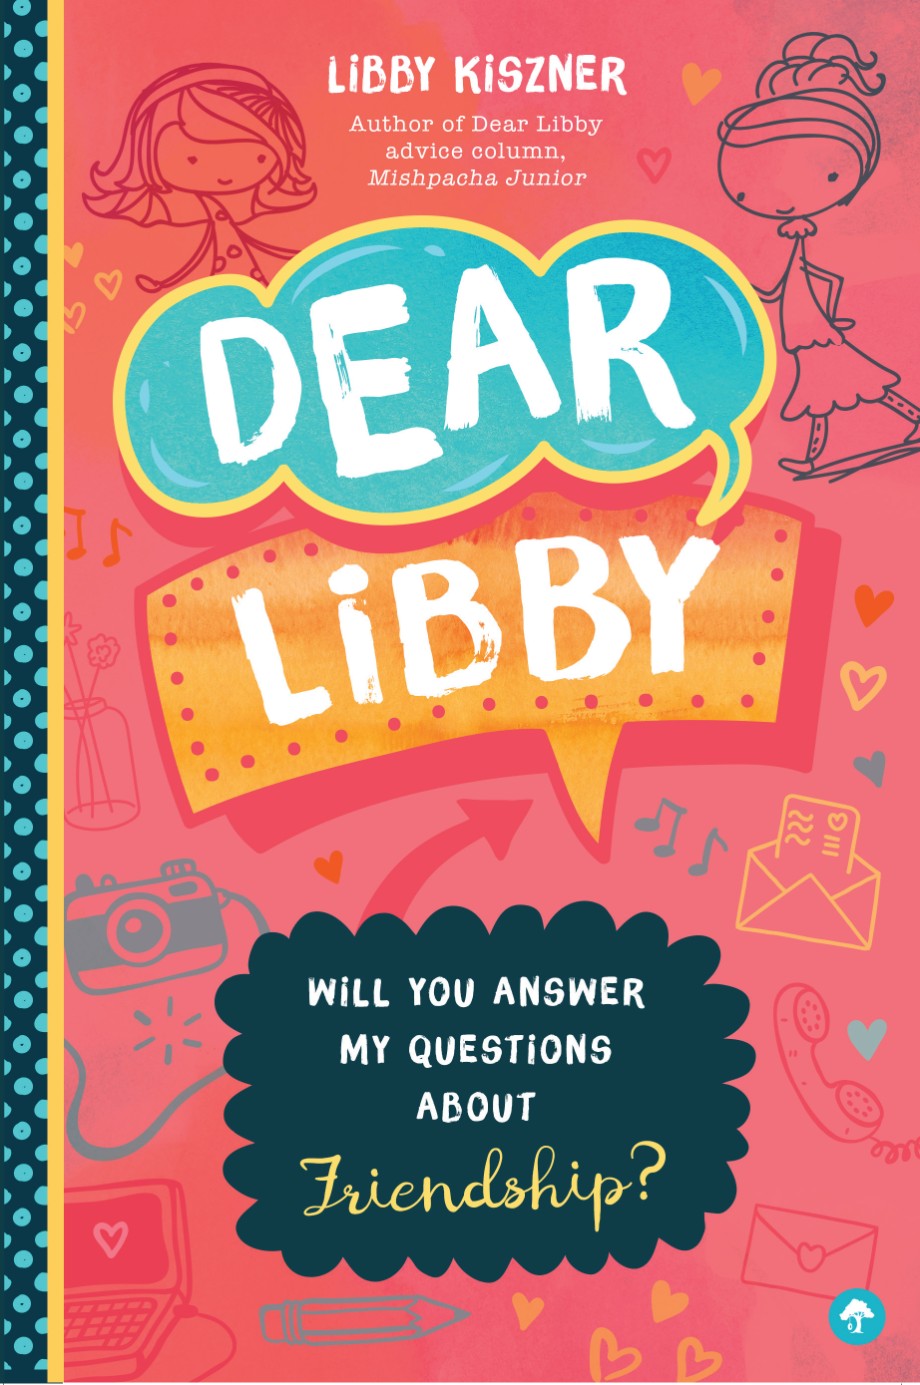 Dear Libby Will You Answer My Questions about Friendship?